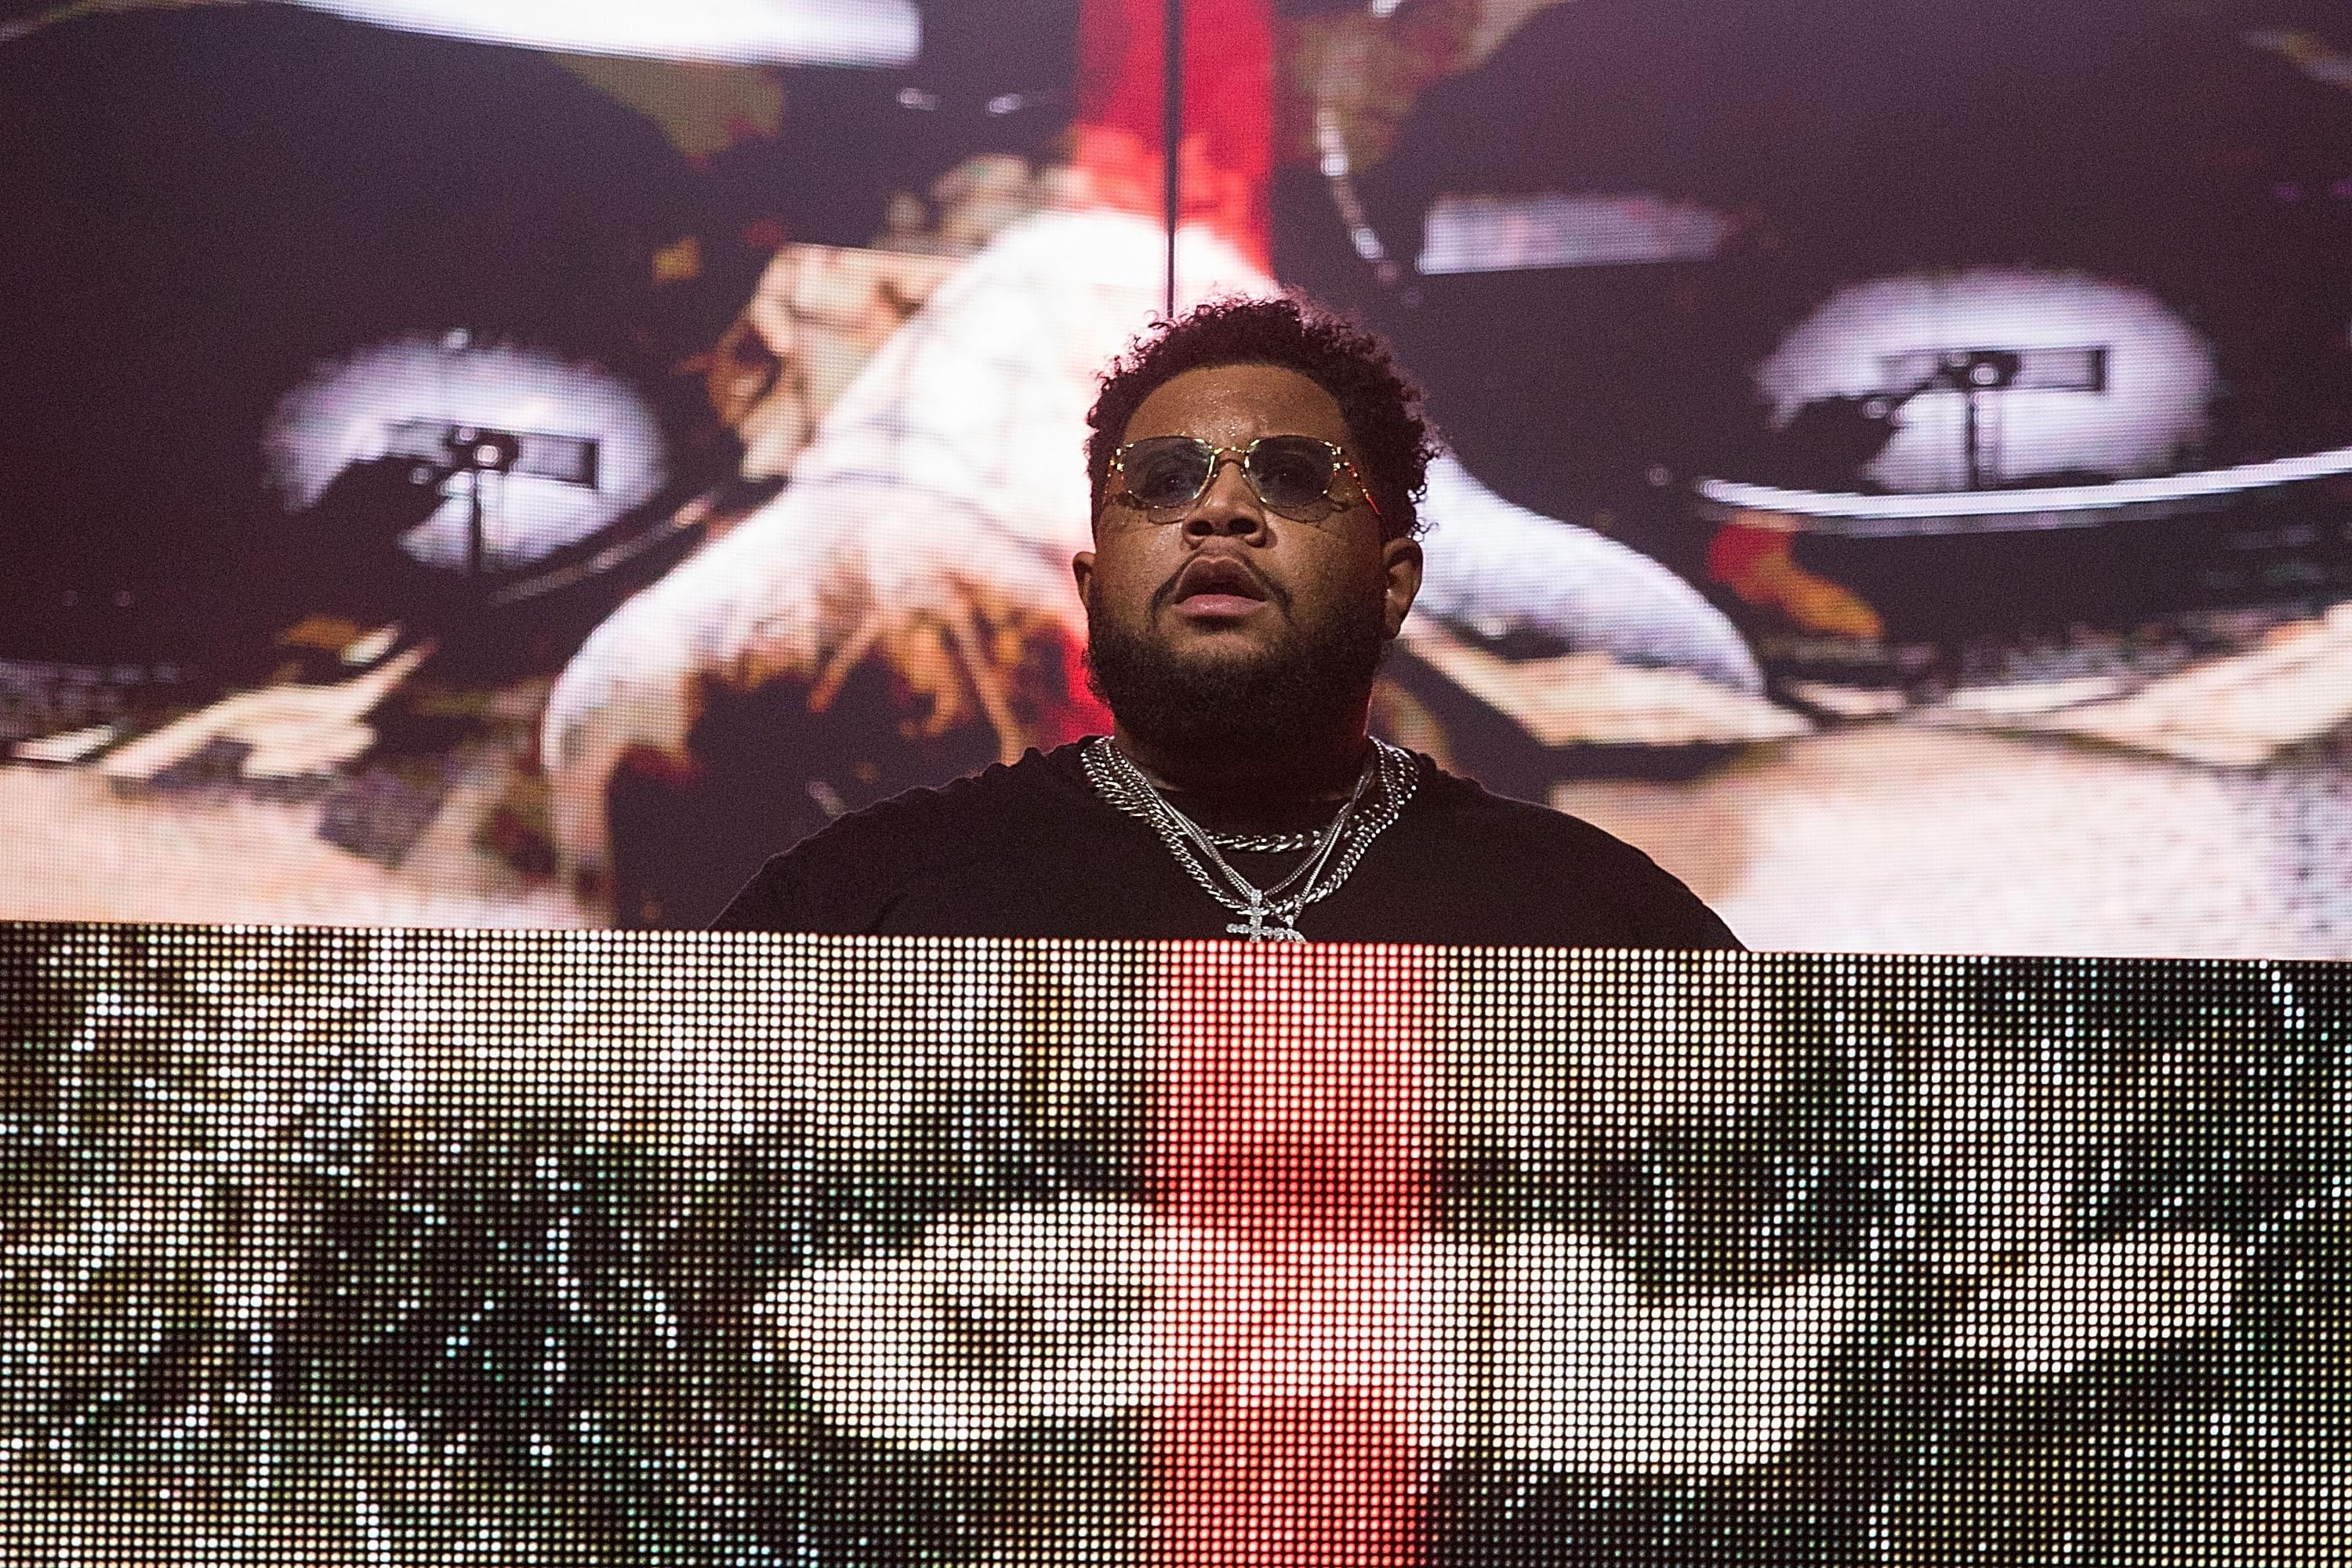 Carnage Returns With “Learn How to Watch” Ft. Mac Miller & MadeinTYO